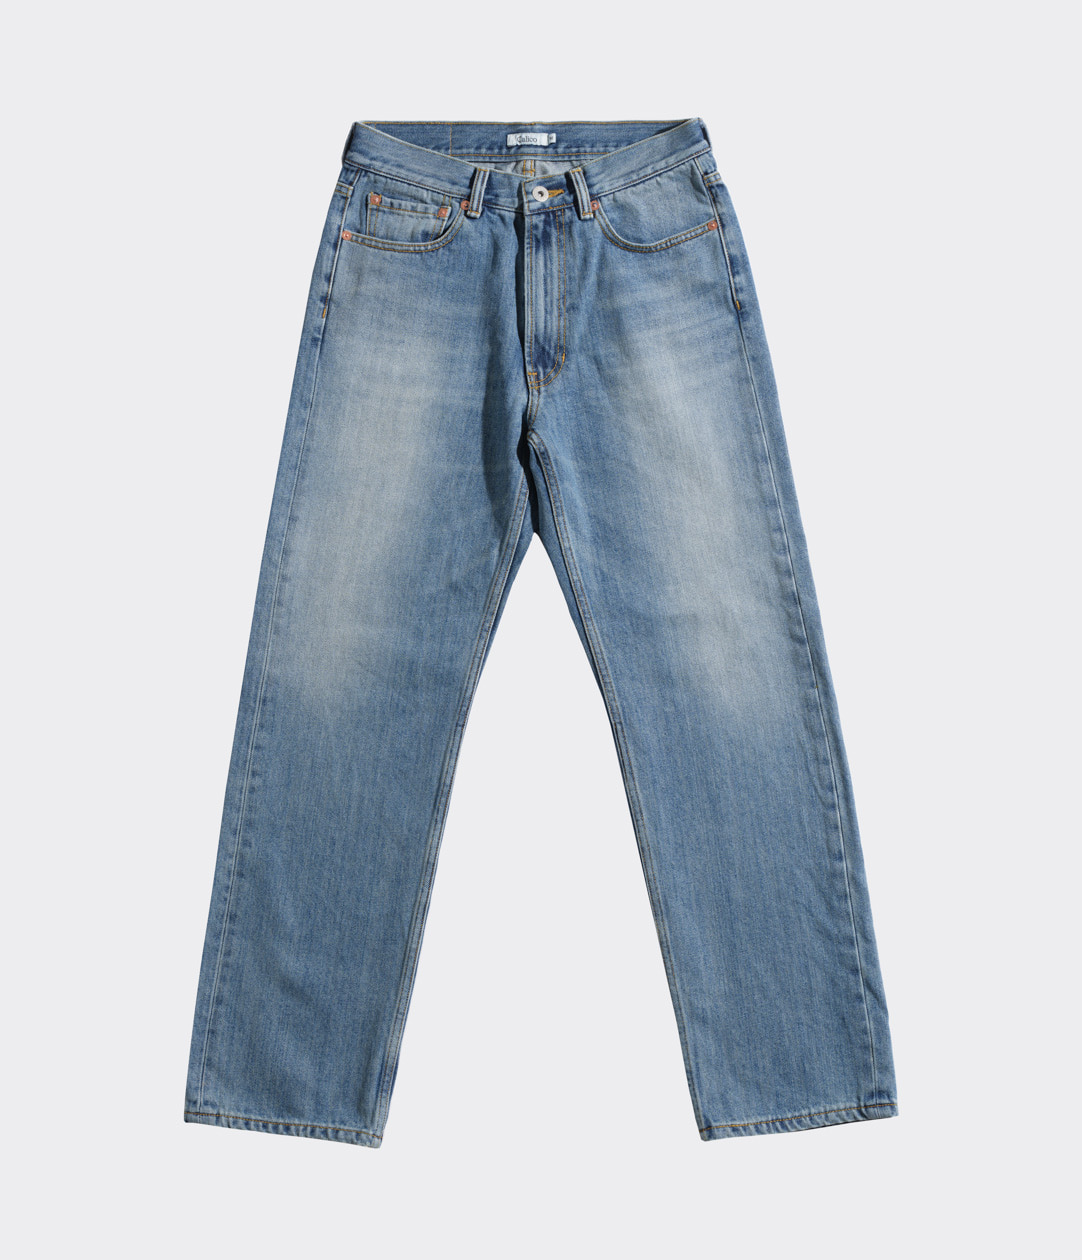 「Dry Goods」Calico Jeans (2nd Gen) / Balearic Blue